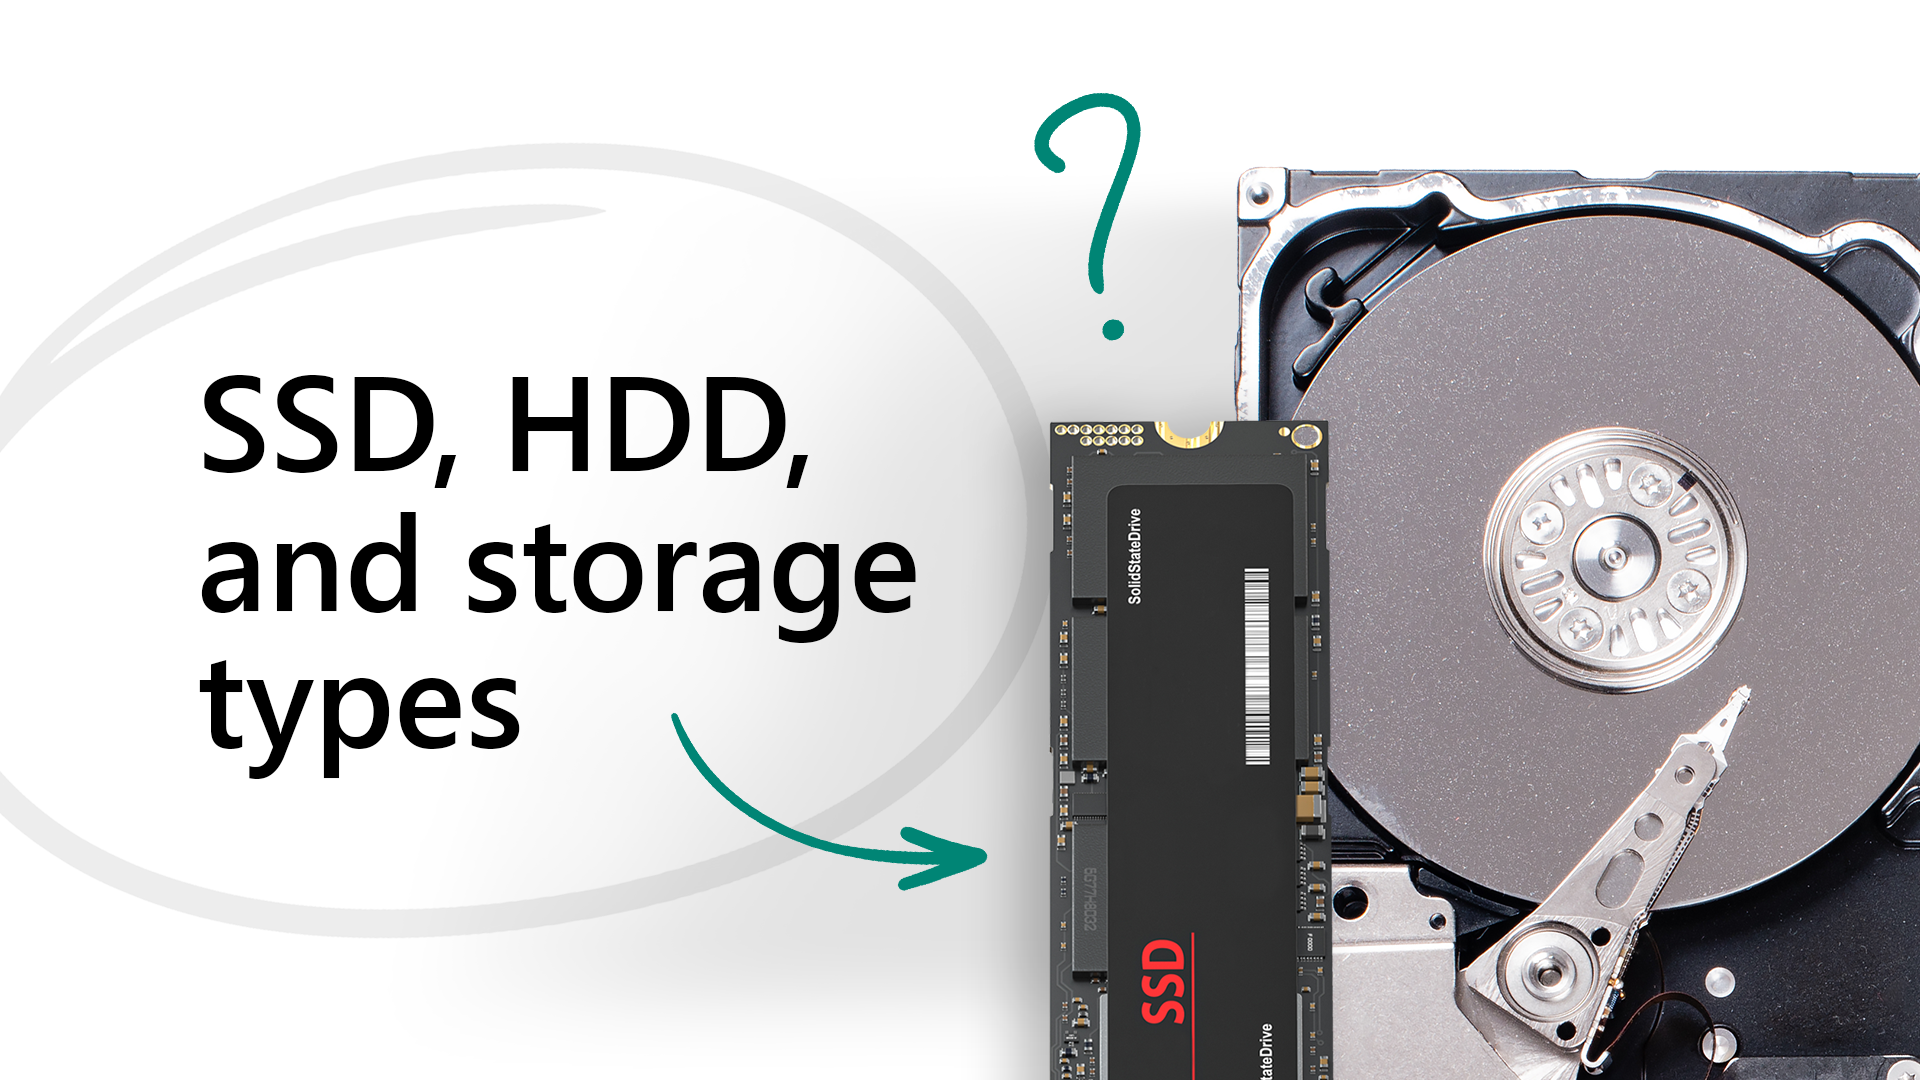 fornærme garage Compulsion All about SSD, HDD, and storage types - Microsoft Support